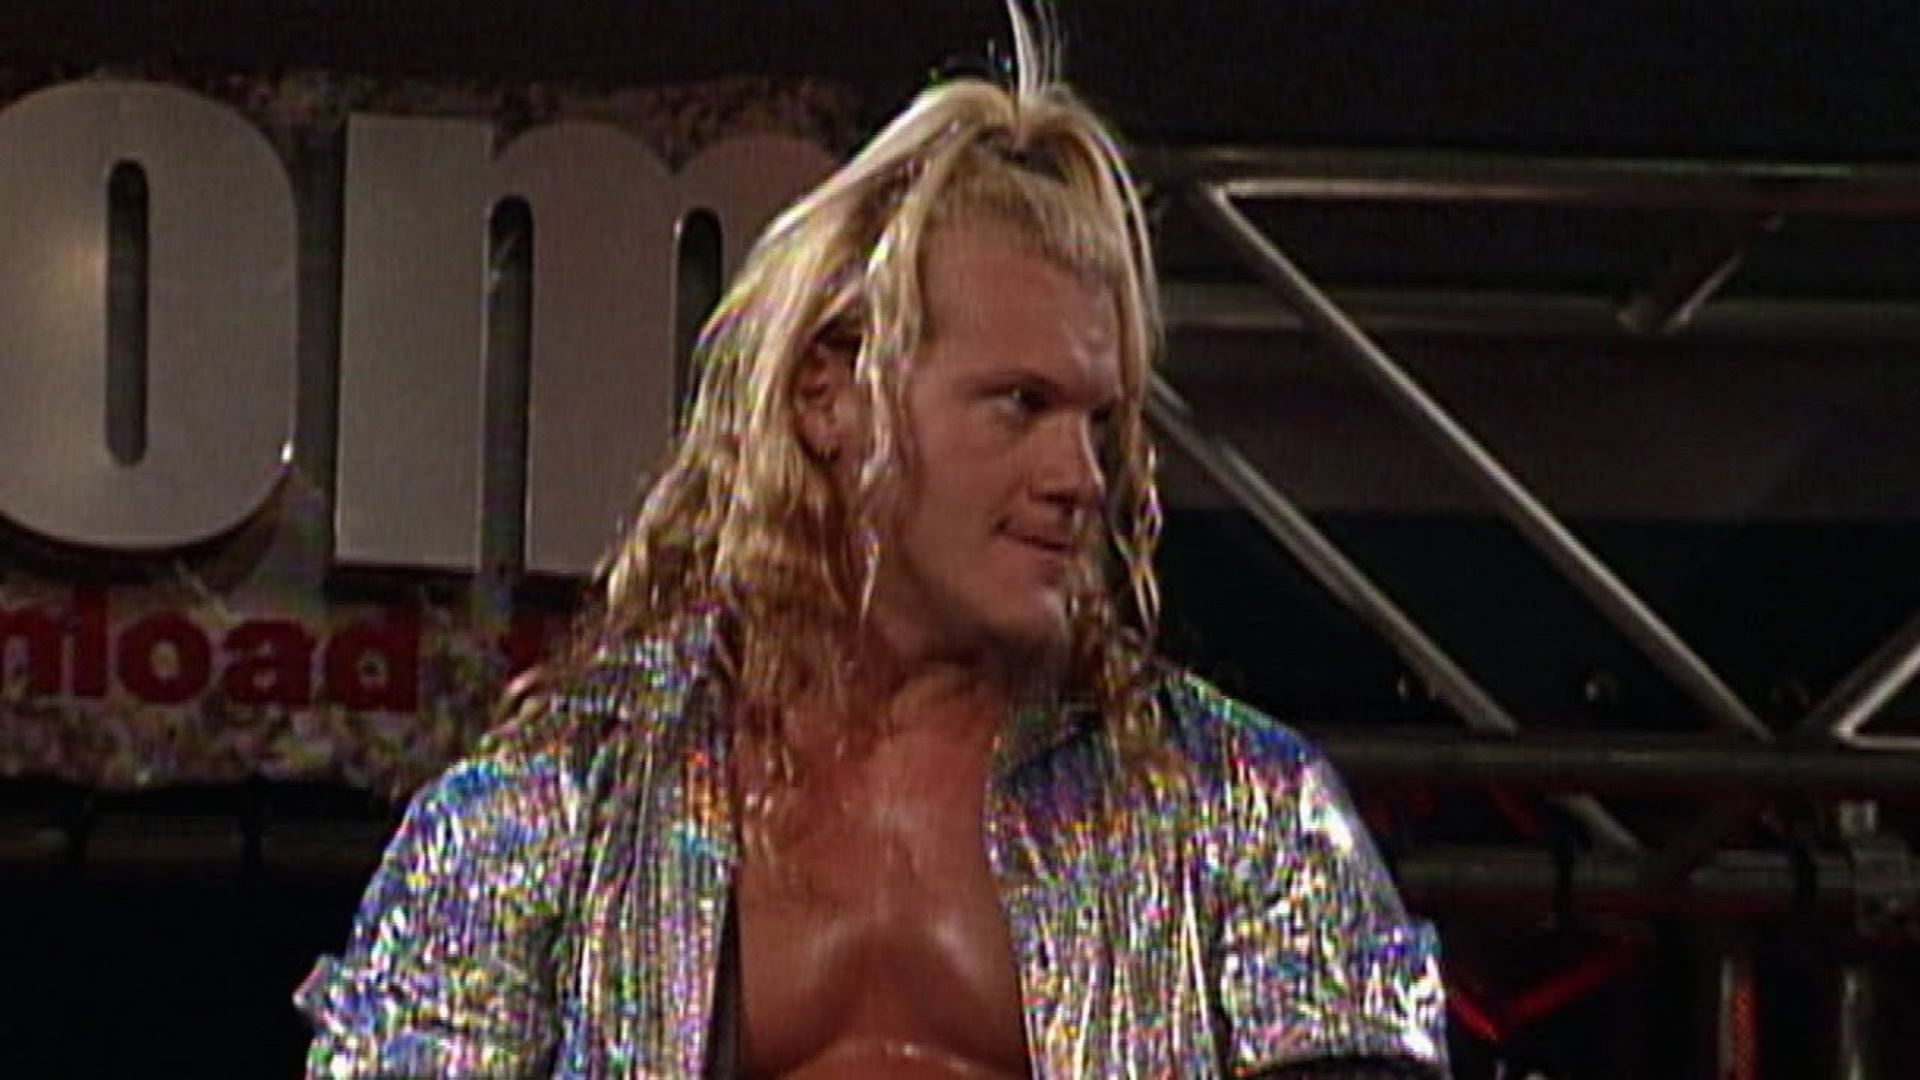 Chris Jericho during his WWF debut.